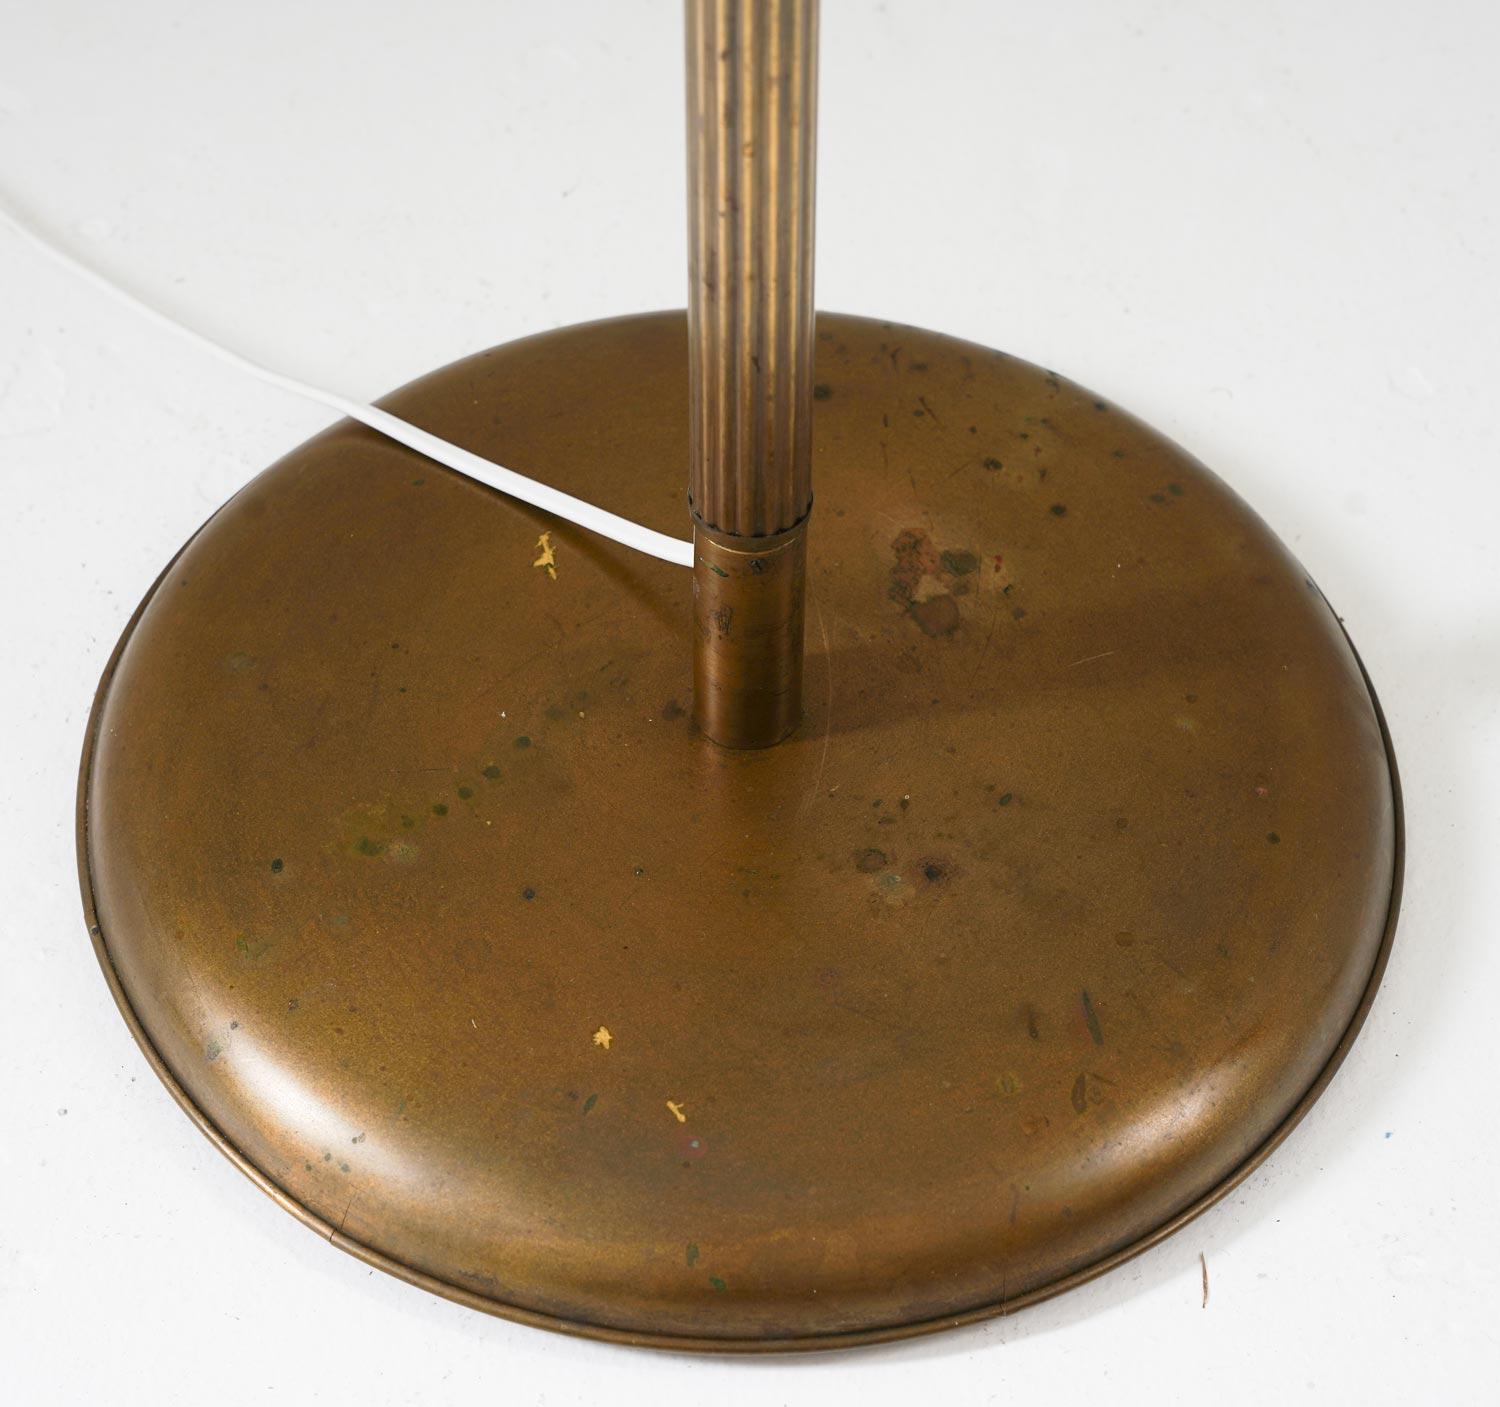 Pair of Swedish Modern Uplight Floor Lamps in Brass, 1940s For Sale 1